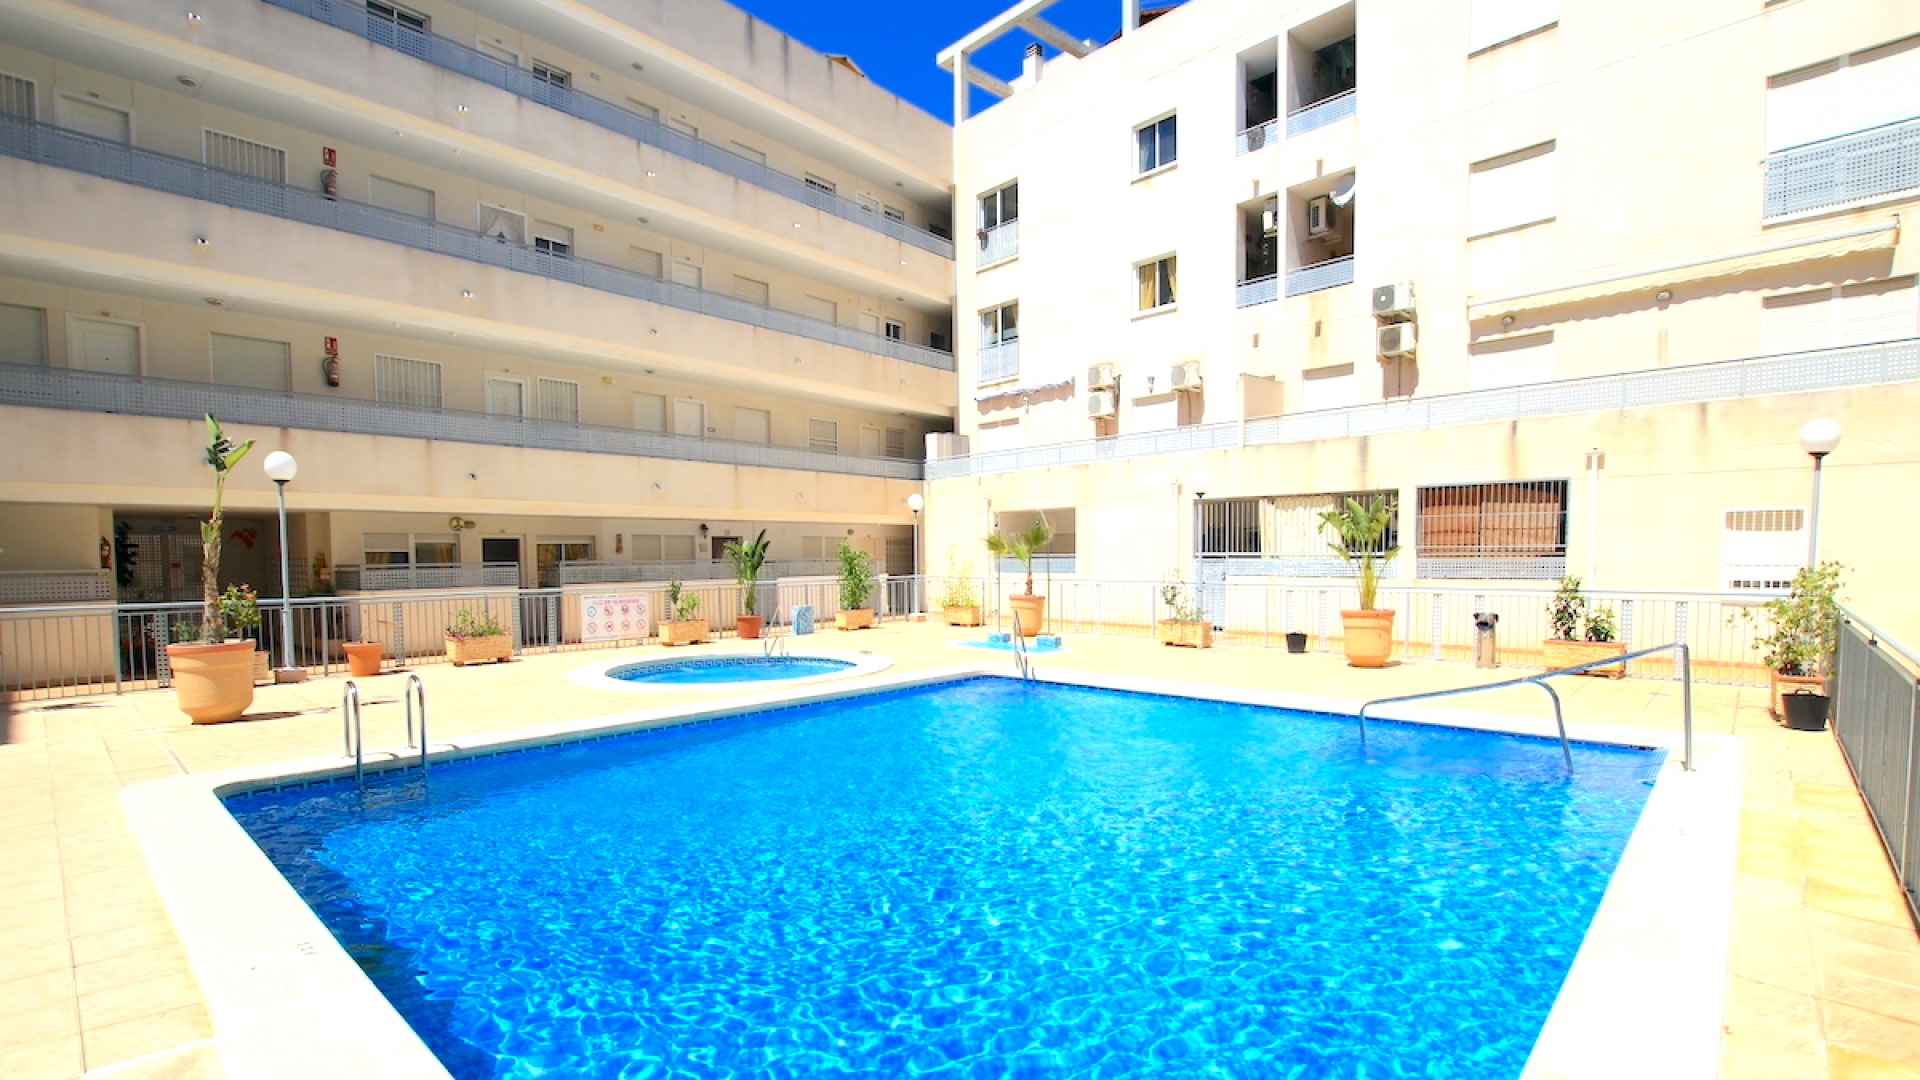 48447_spacious_2_bedroom_ground_floor_apartment_with_pool_views_090524155040_img_9210